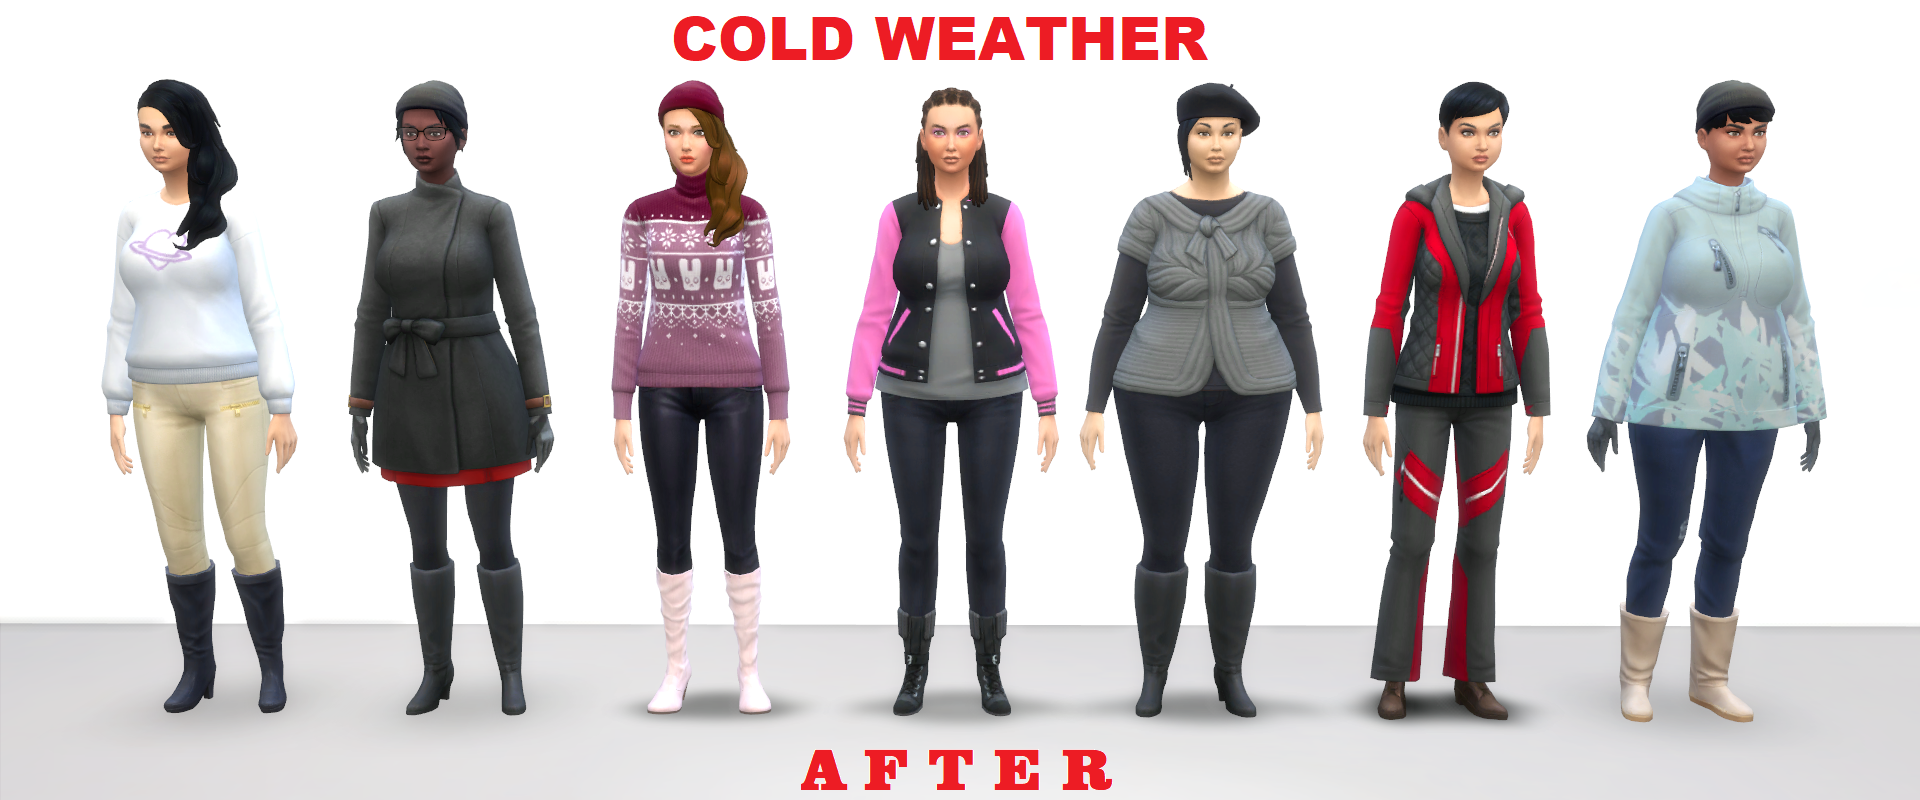 ColdWeather2.png.8553f83a193a0a6704b080ad00080a0a.png